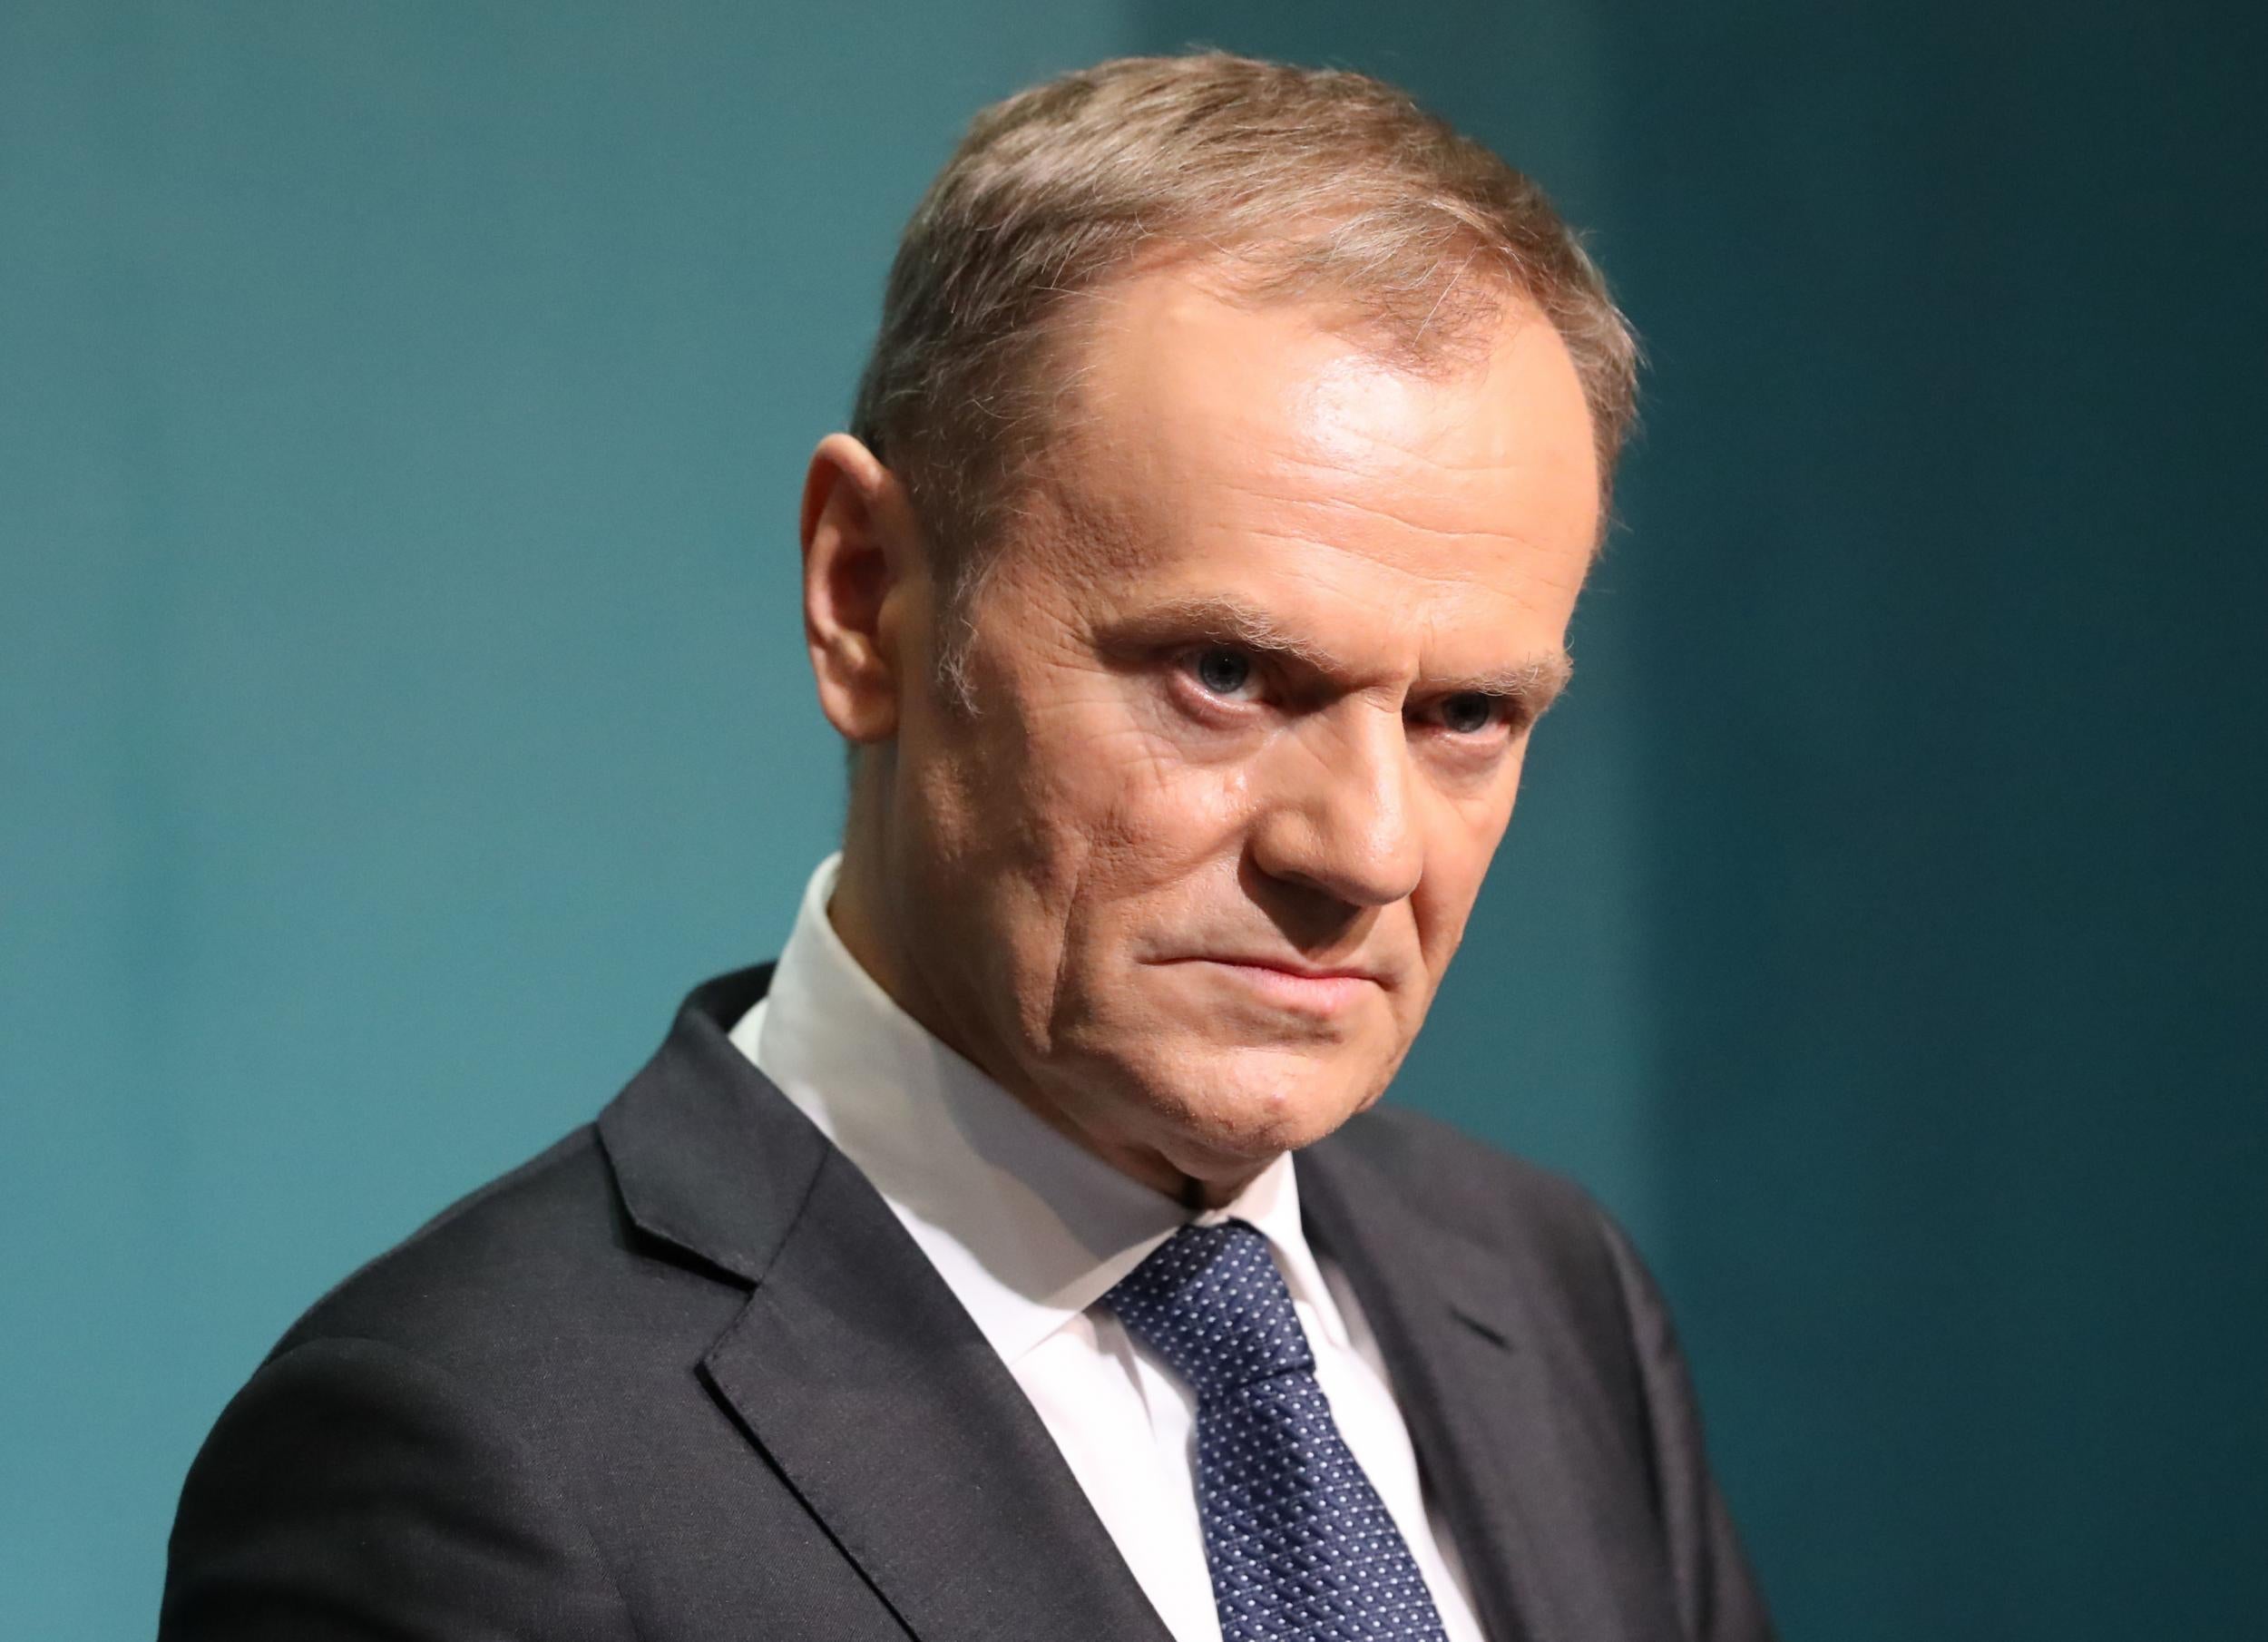 No-deal Brexit is &apos;more likely than ever before&apos;, warns EU council president Donald Tusk